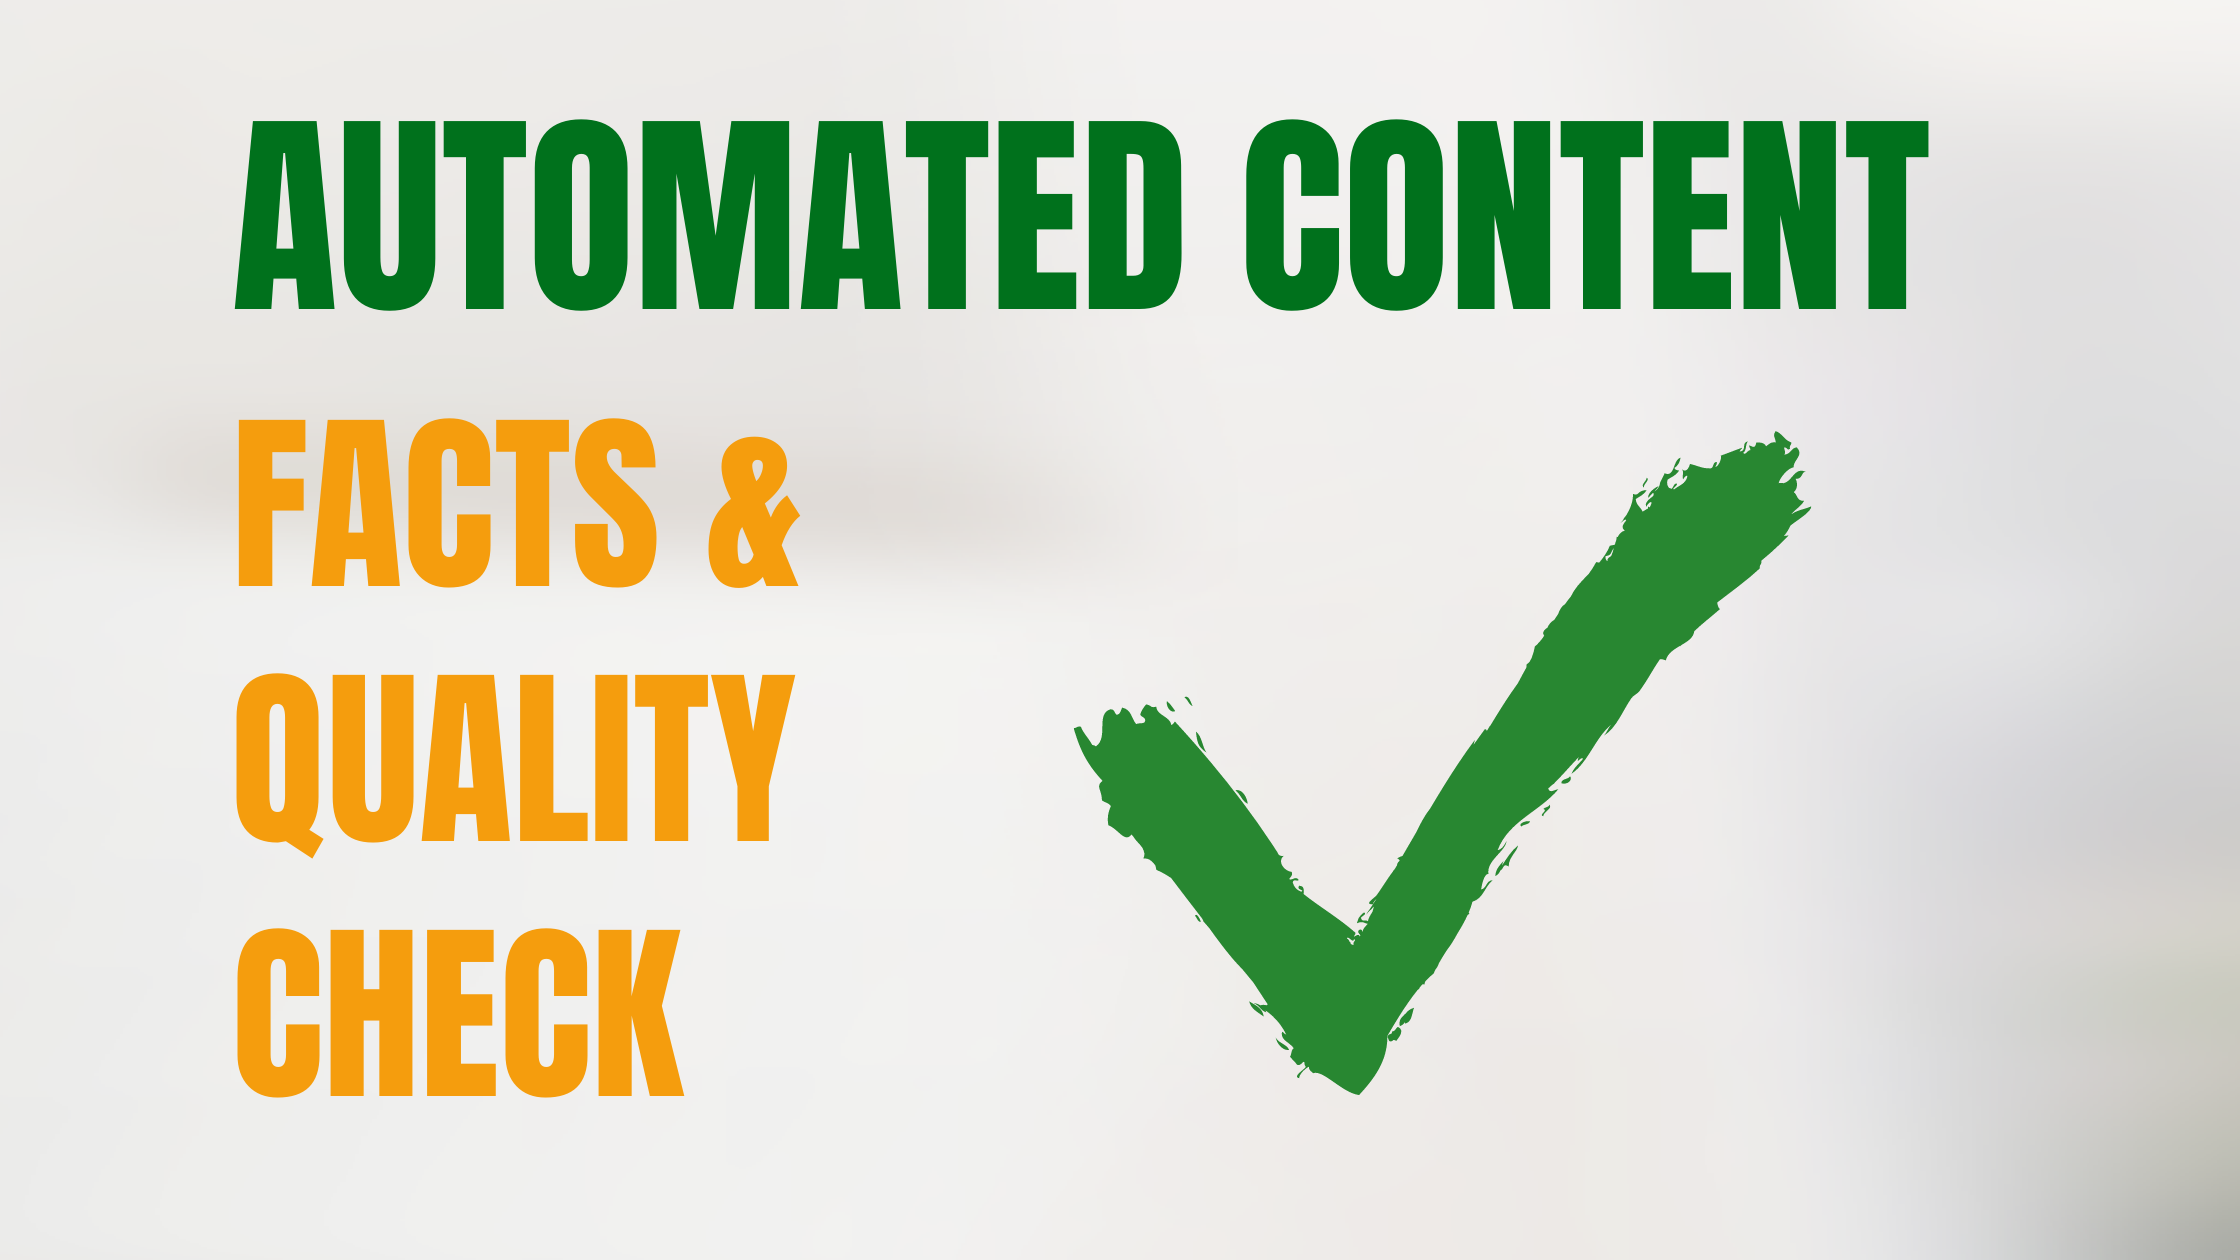 Automated Content: Facts & Quality Check